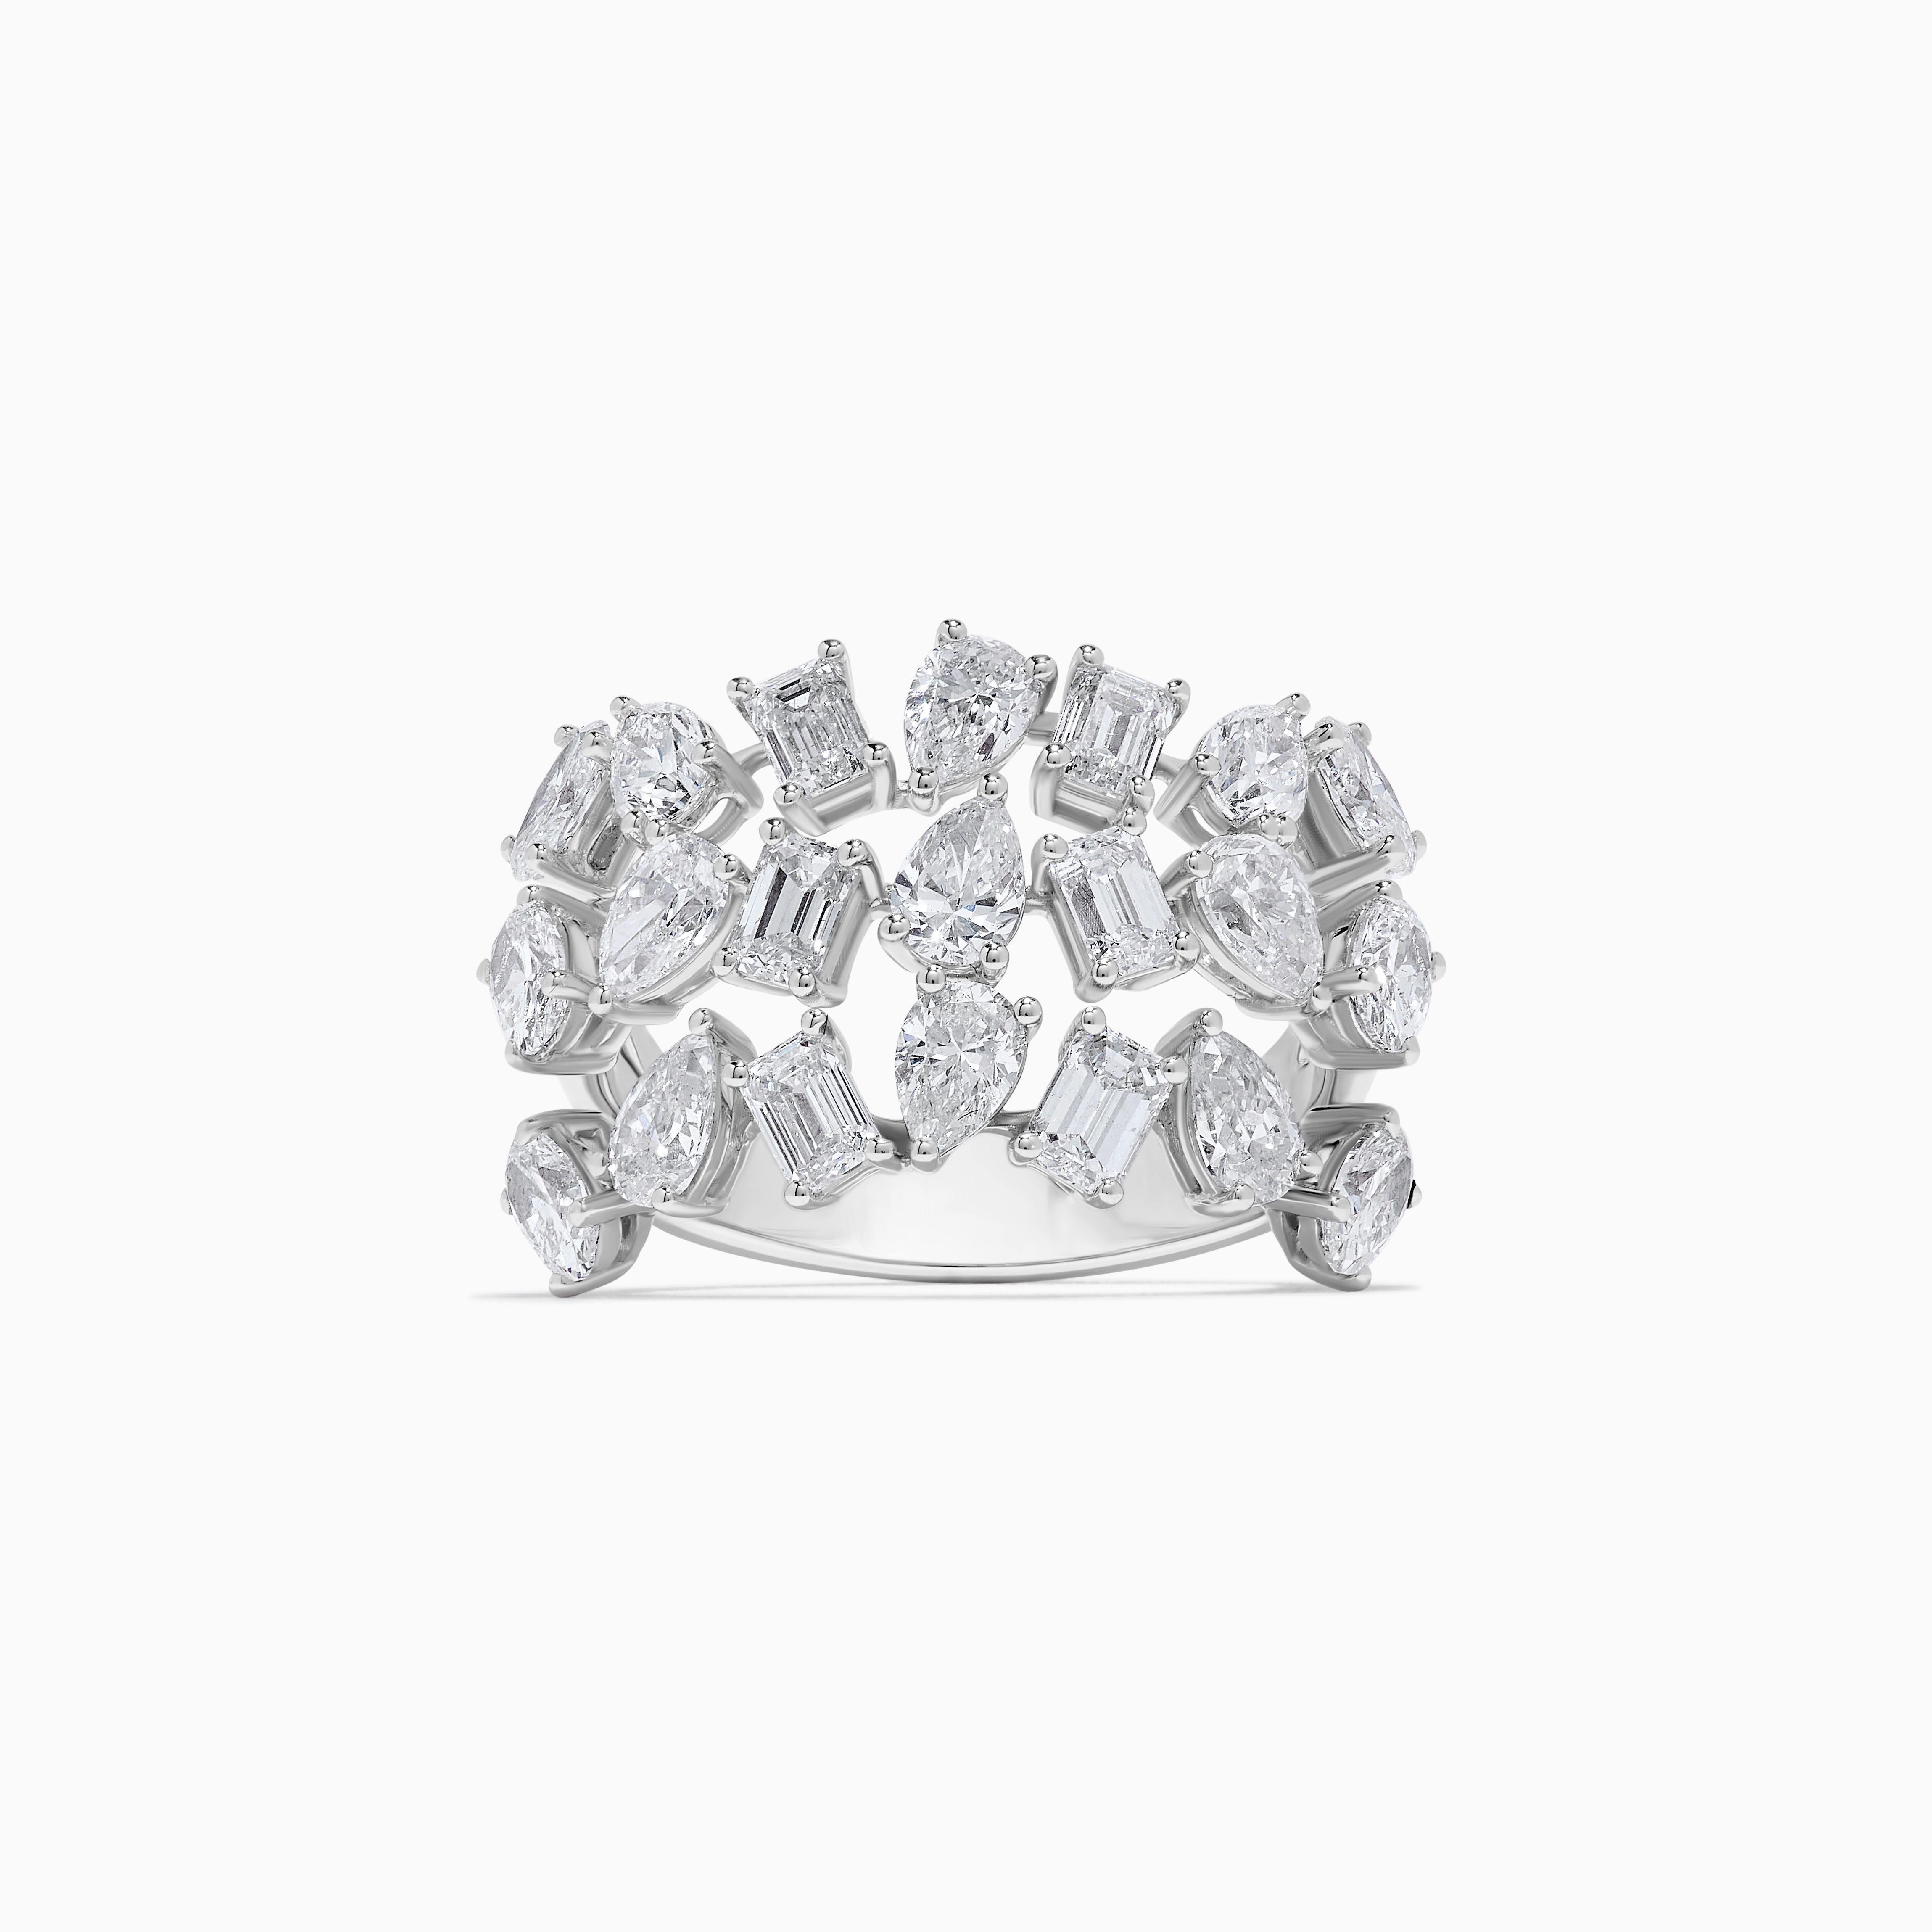 Contemporary Natural White Mix Diamond 3.98 Carat TW White Gold Cocktail Ring For Sale